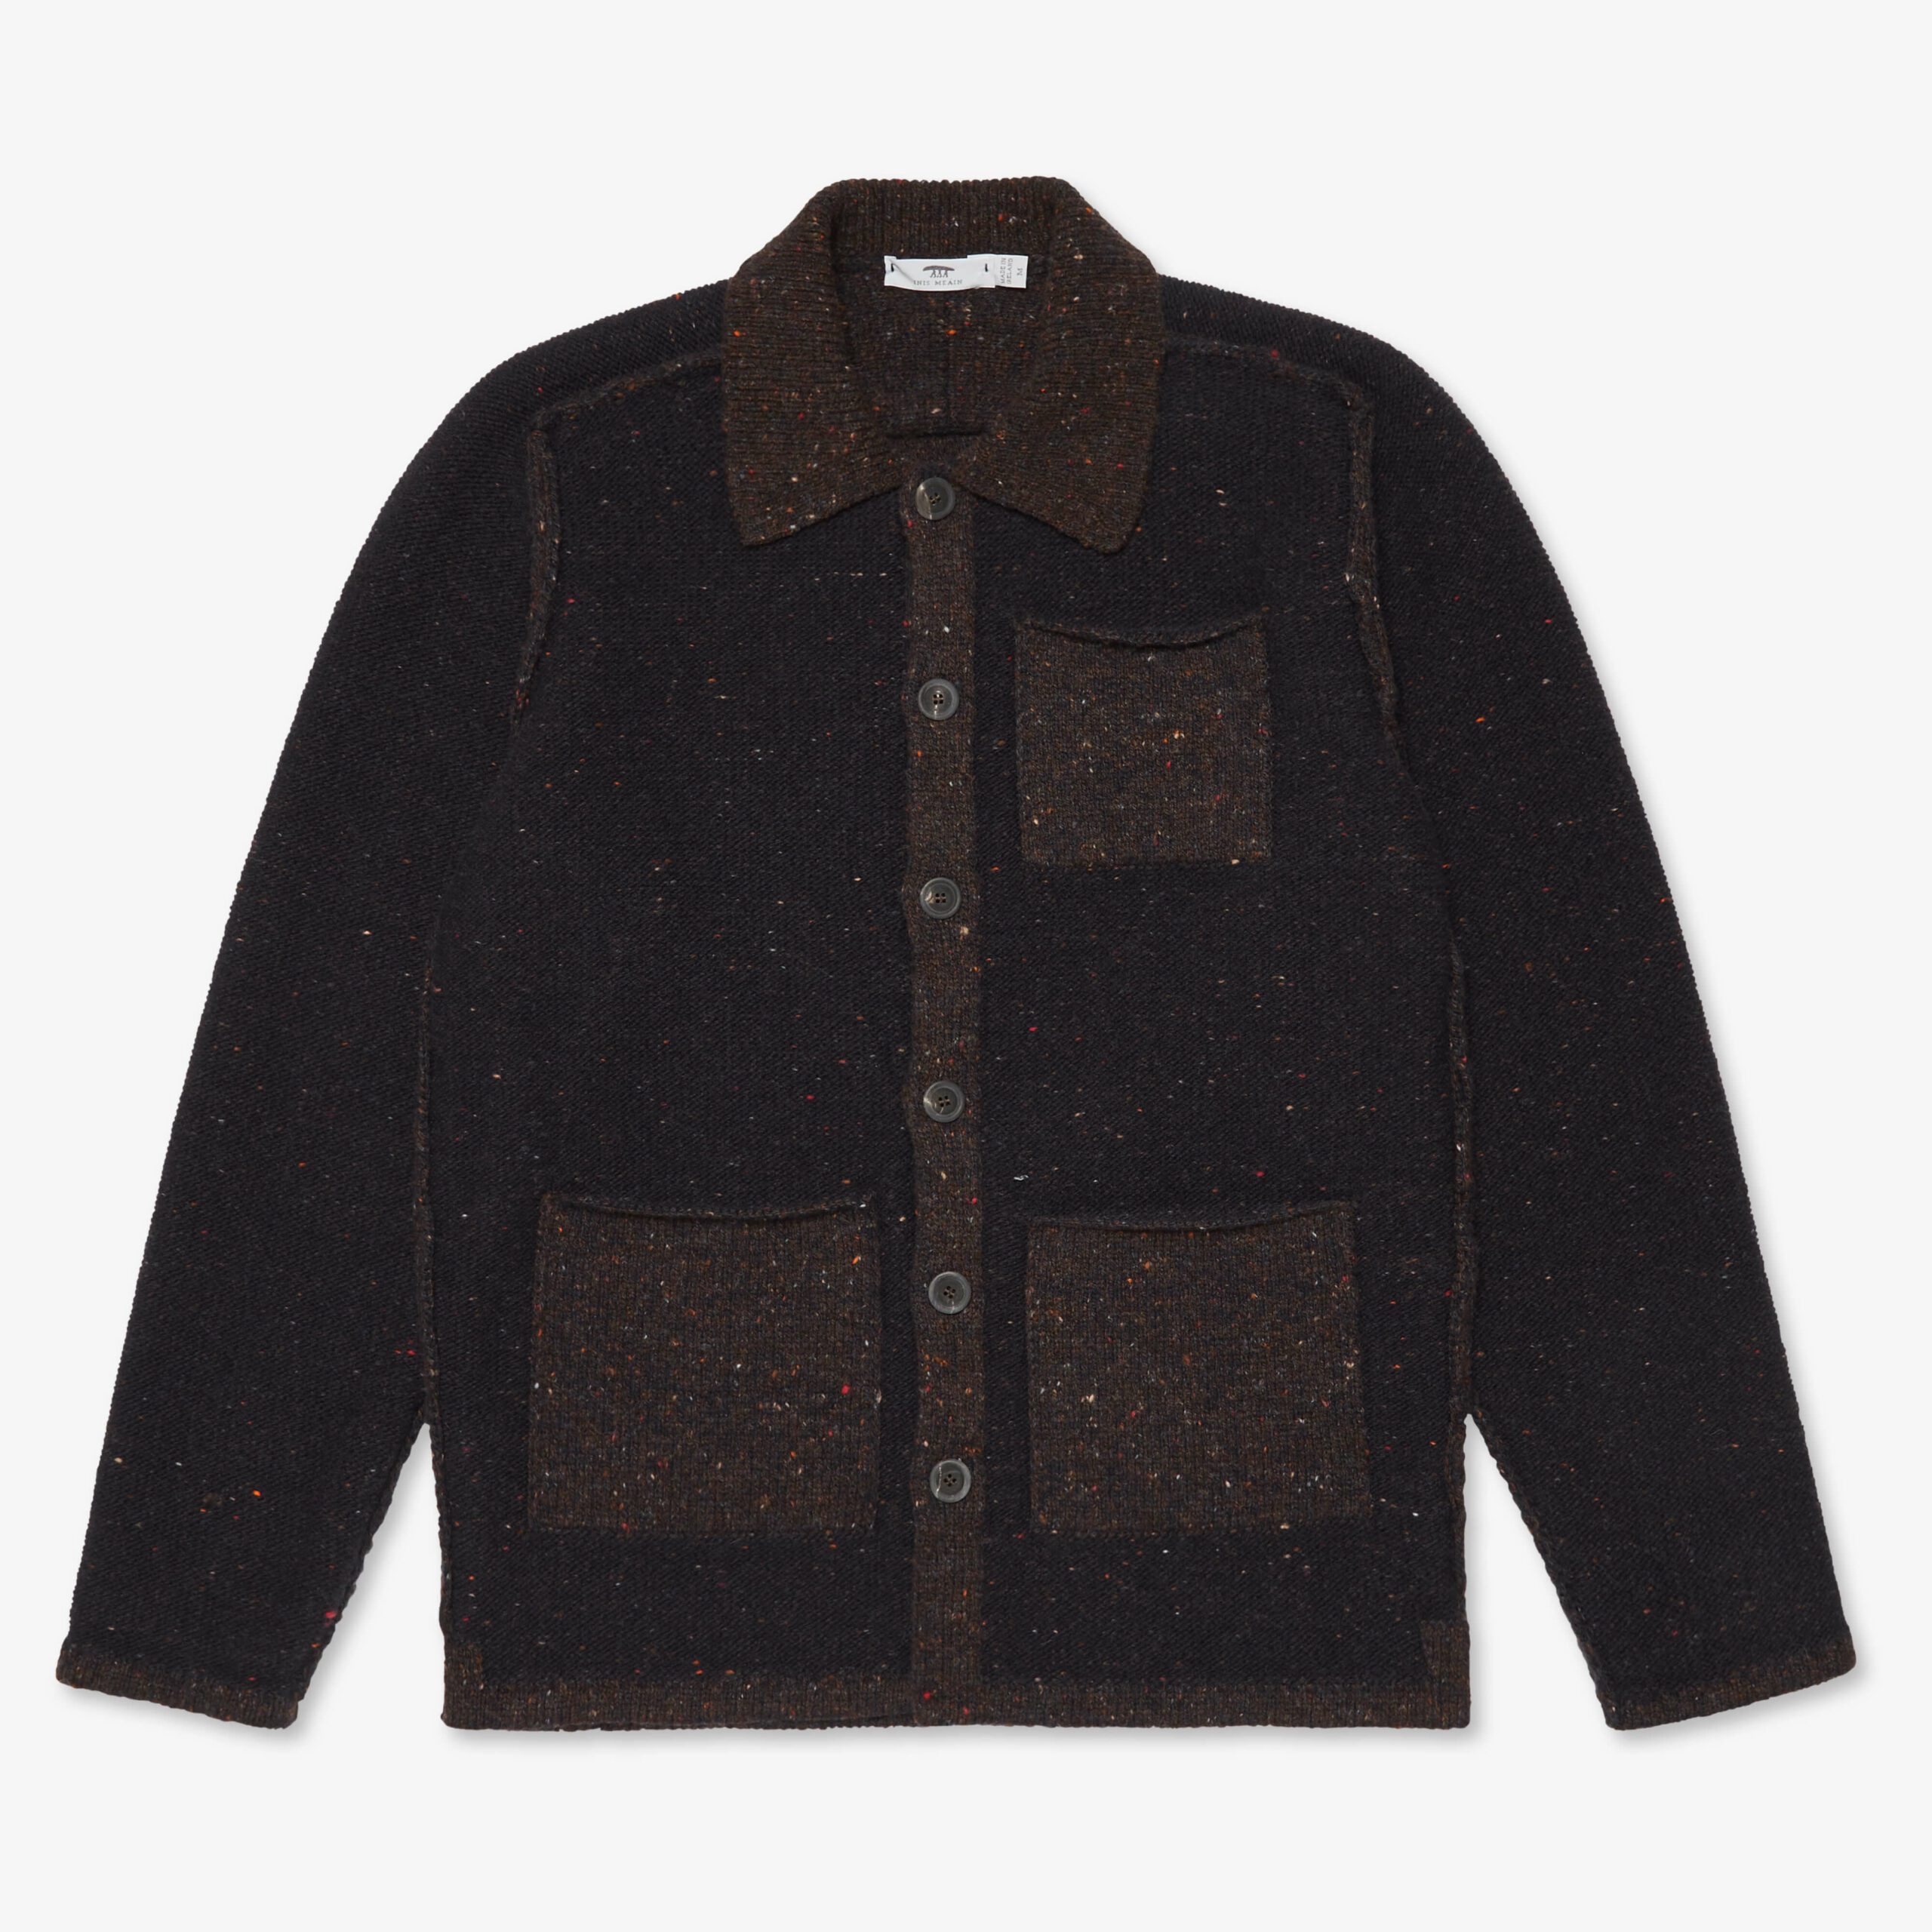 Reverse Carpenter's Jacket - Louth — Inis Meáin Knitwear